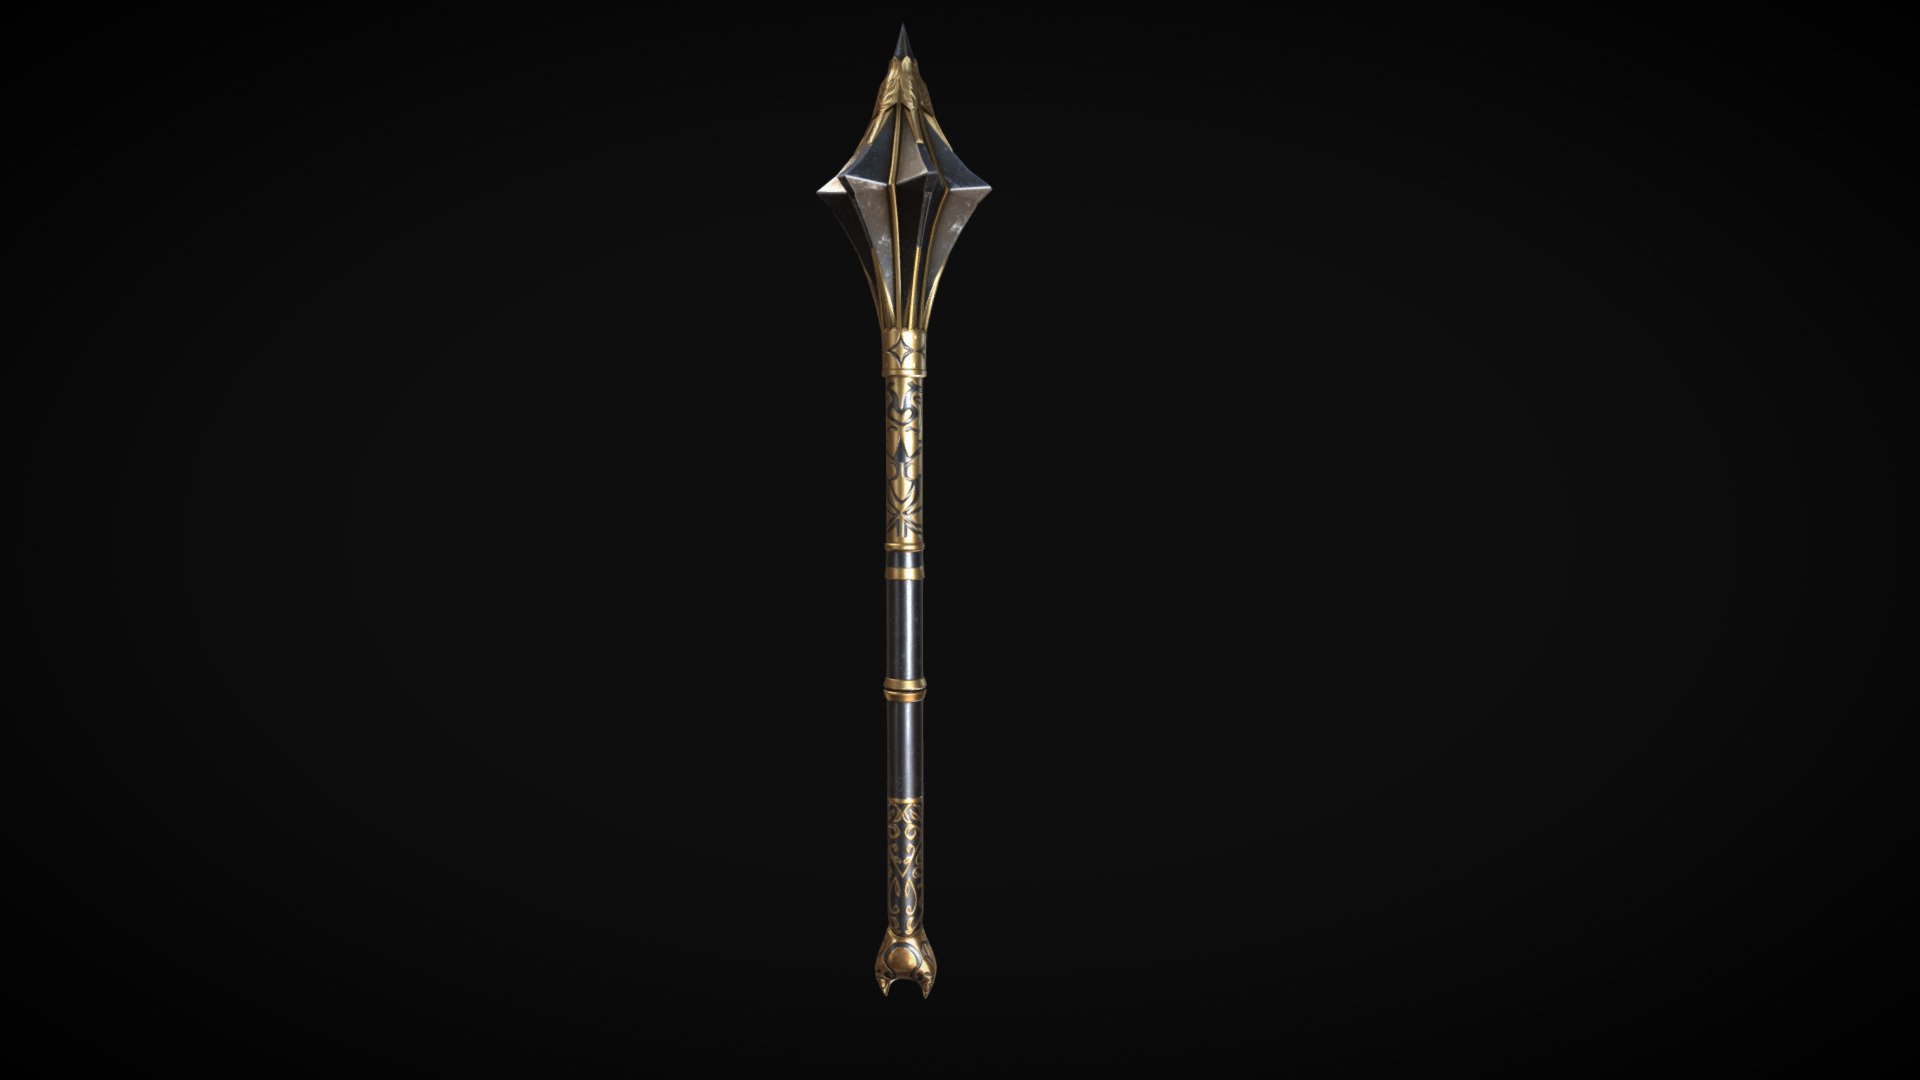 This is a remake of Oblivion's Ebony mace, made for the mod Skyblivion 3d model